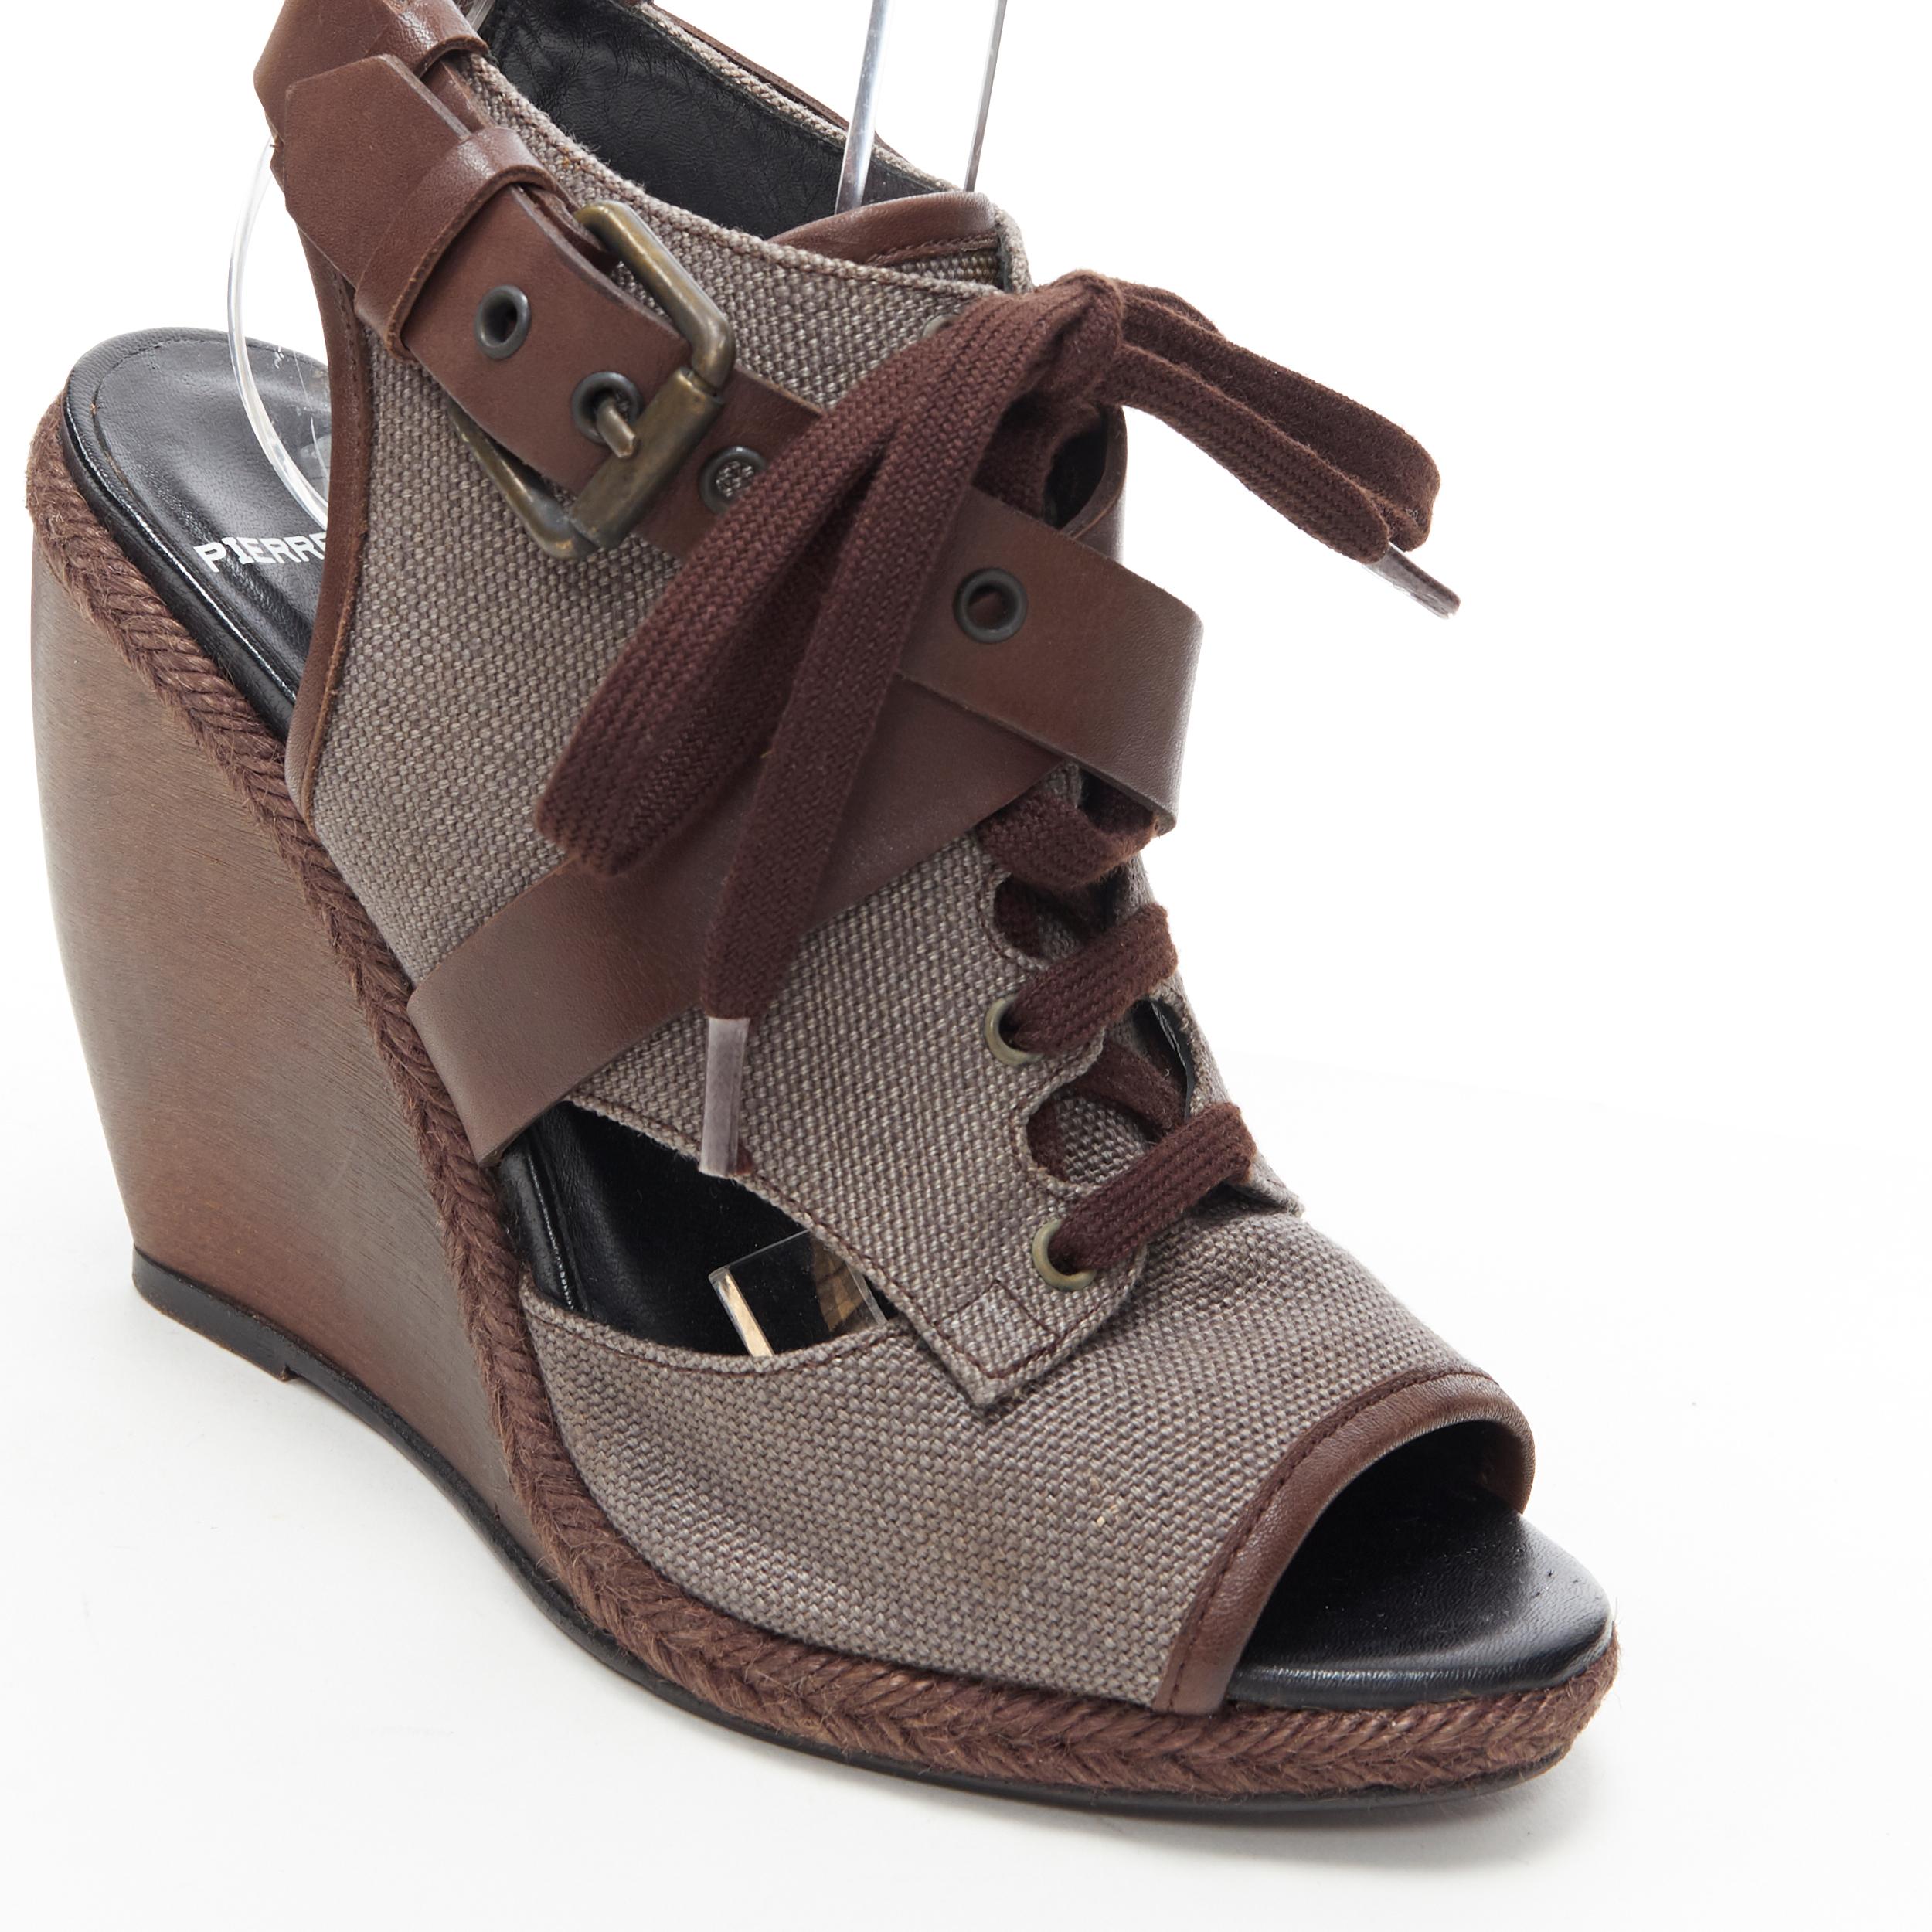 PIERRE HARDY brown canvas cross strap buckled open toe curved wooden wedge EU36 1